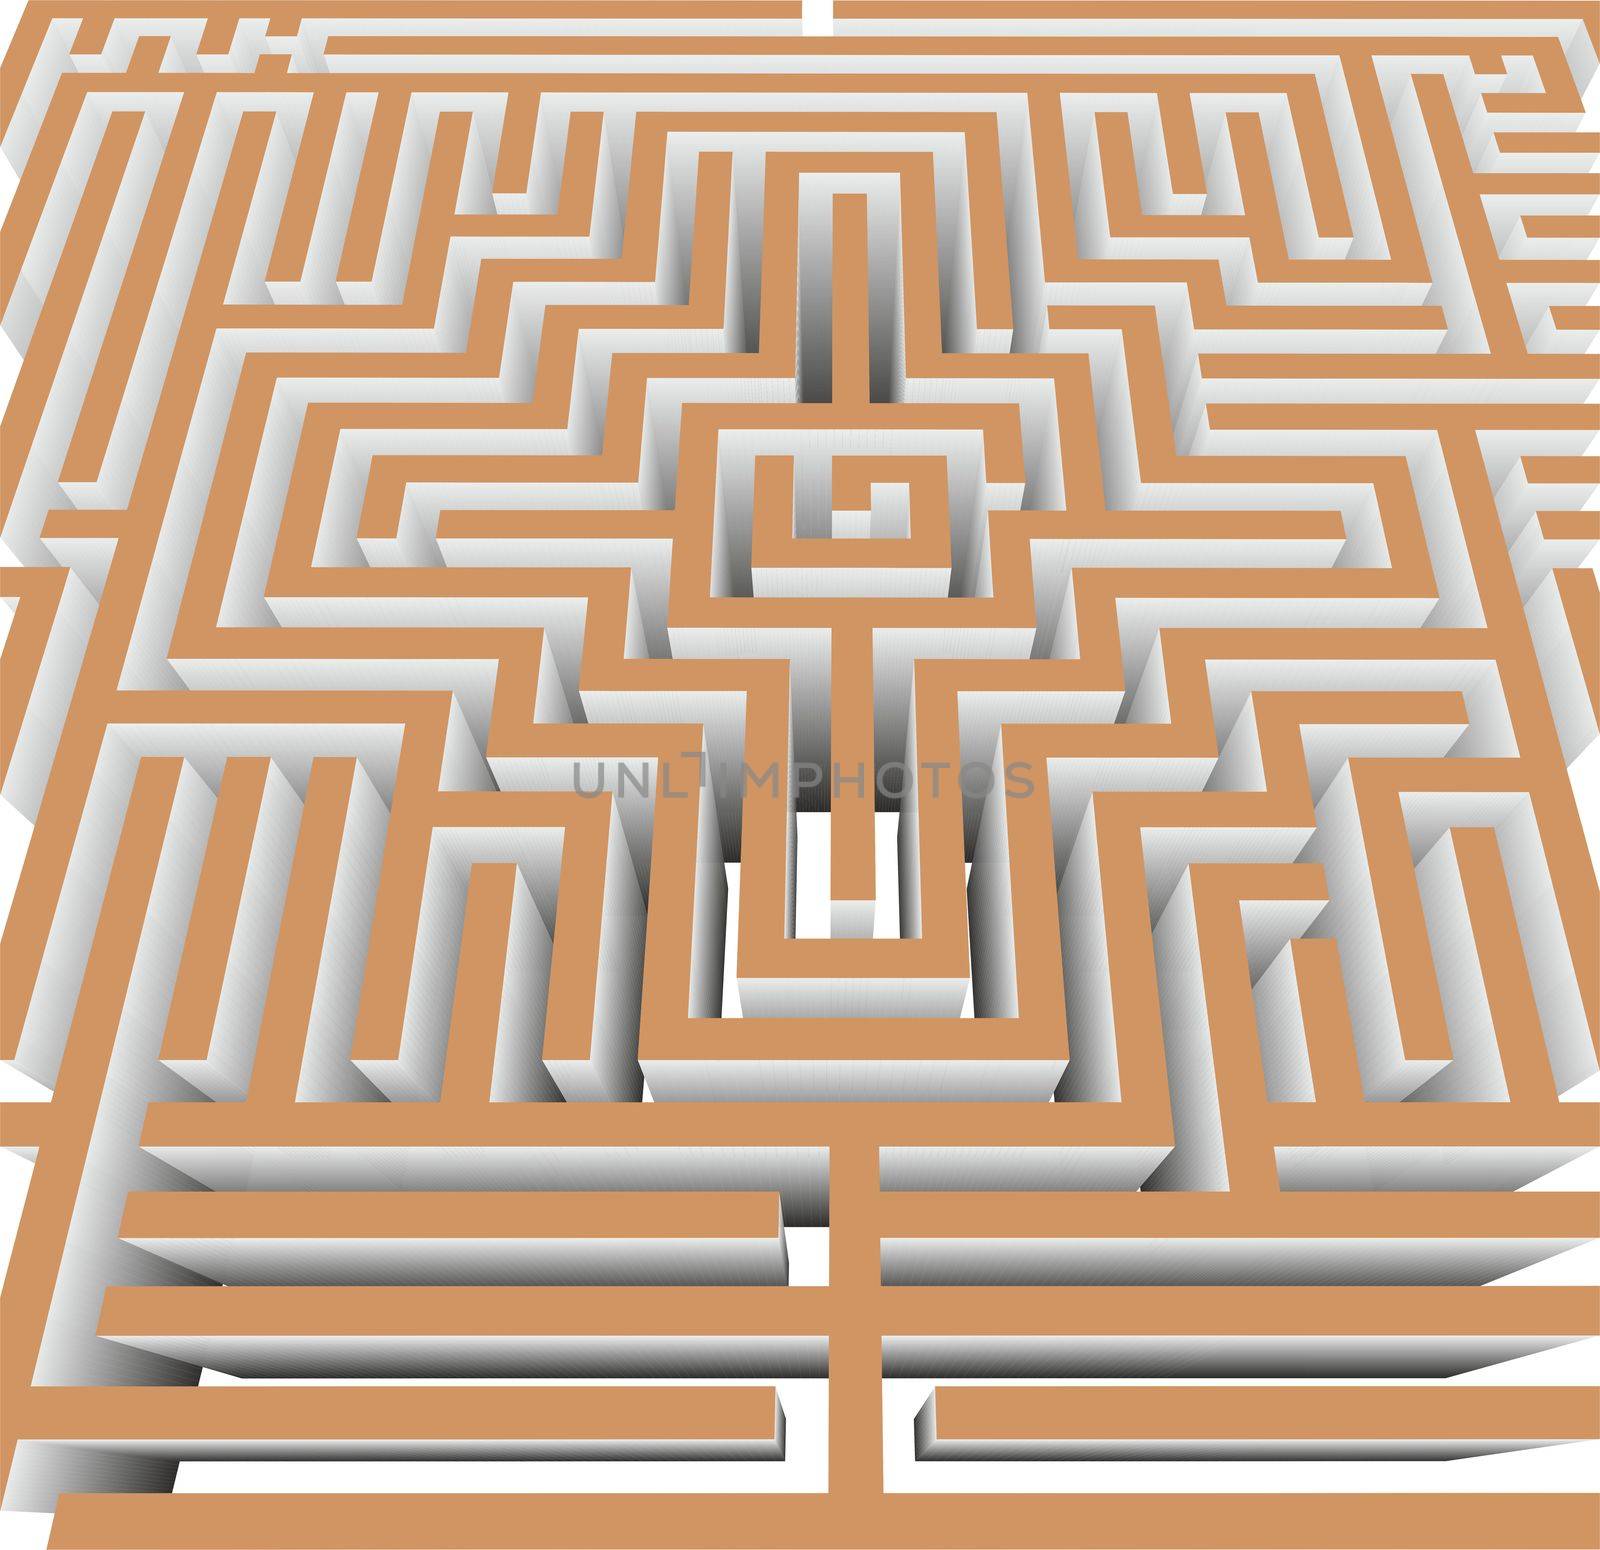 Illustration of a maze and labyrinth